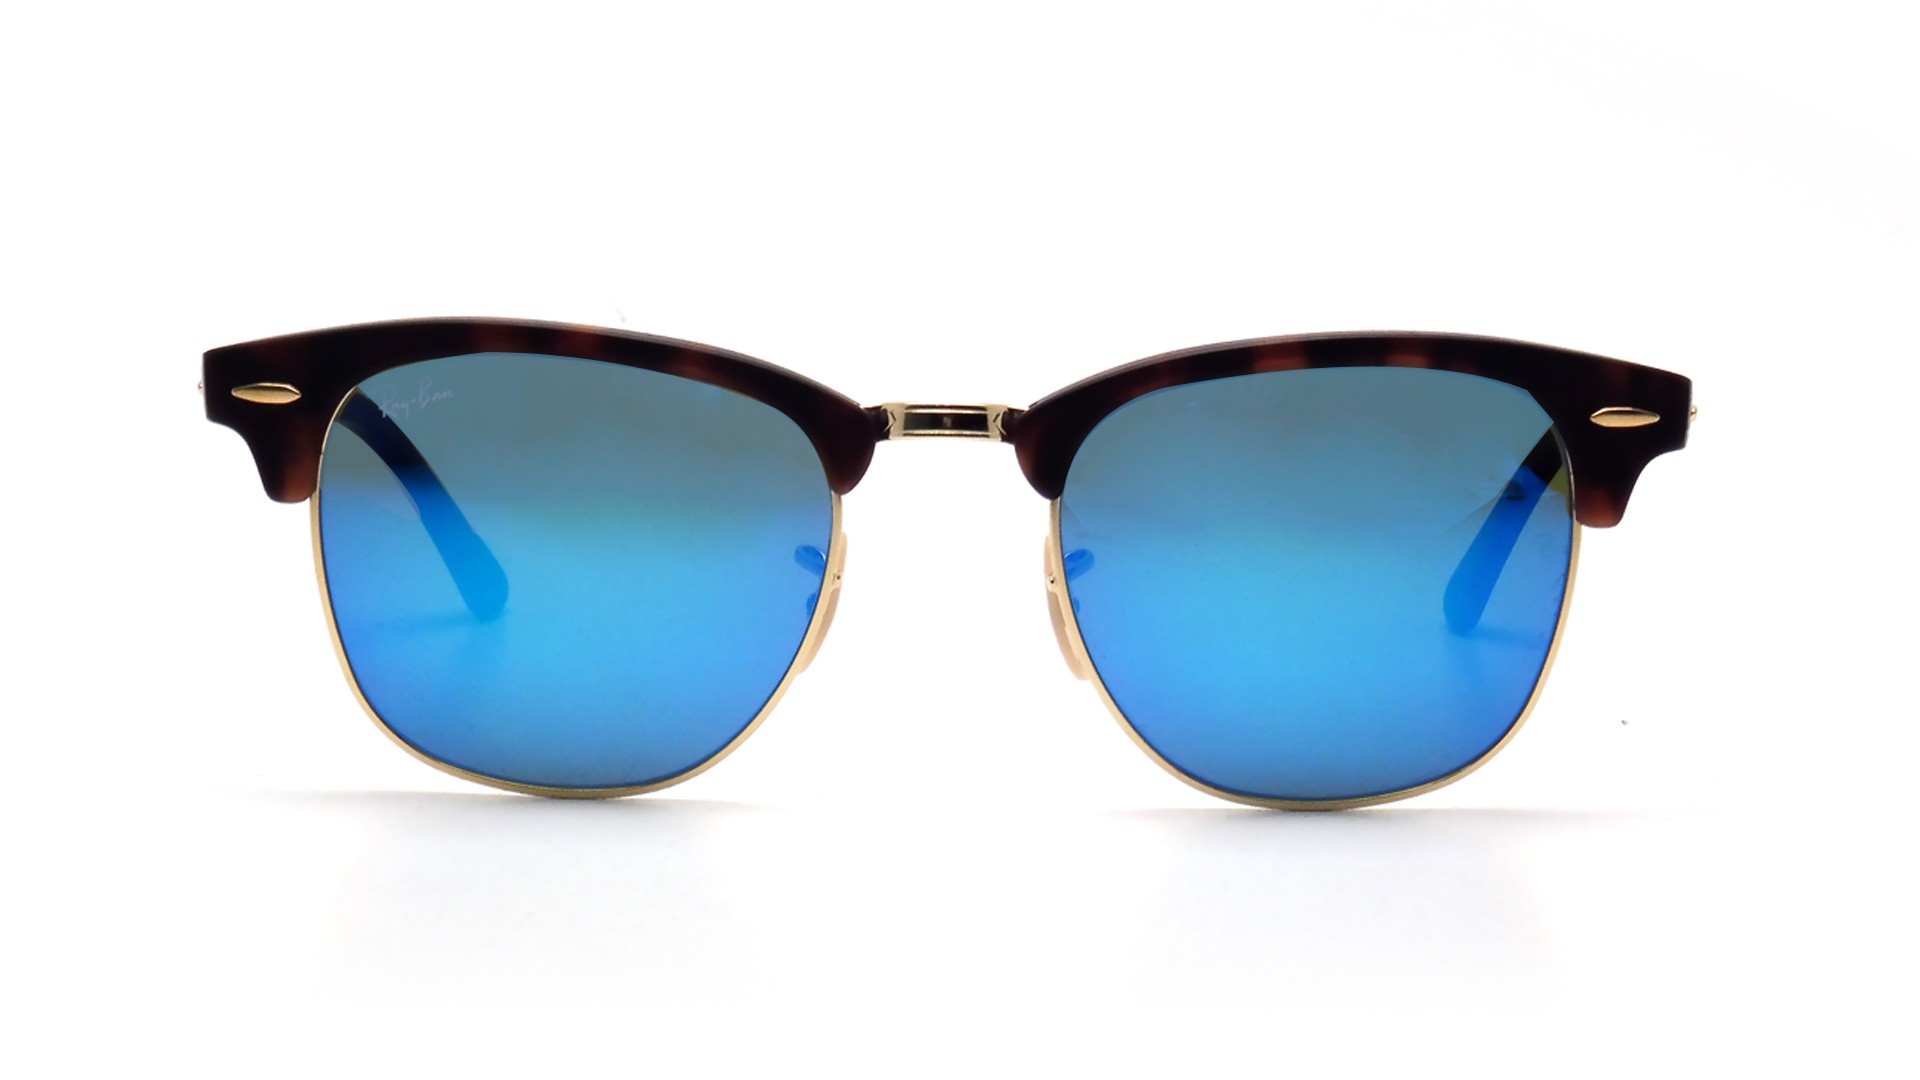 Ray-Ban Clubmaster Tortoise RB3016 1145 